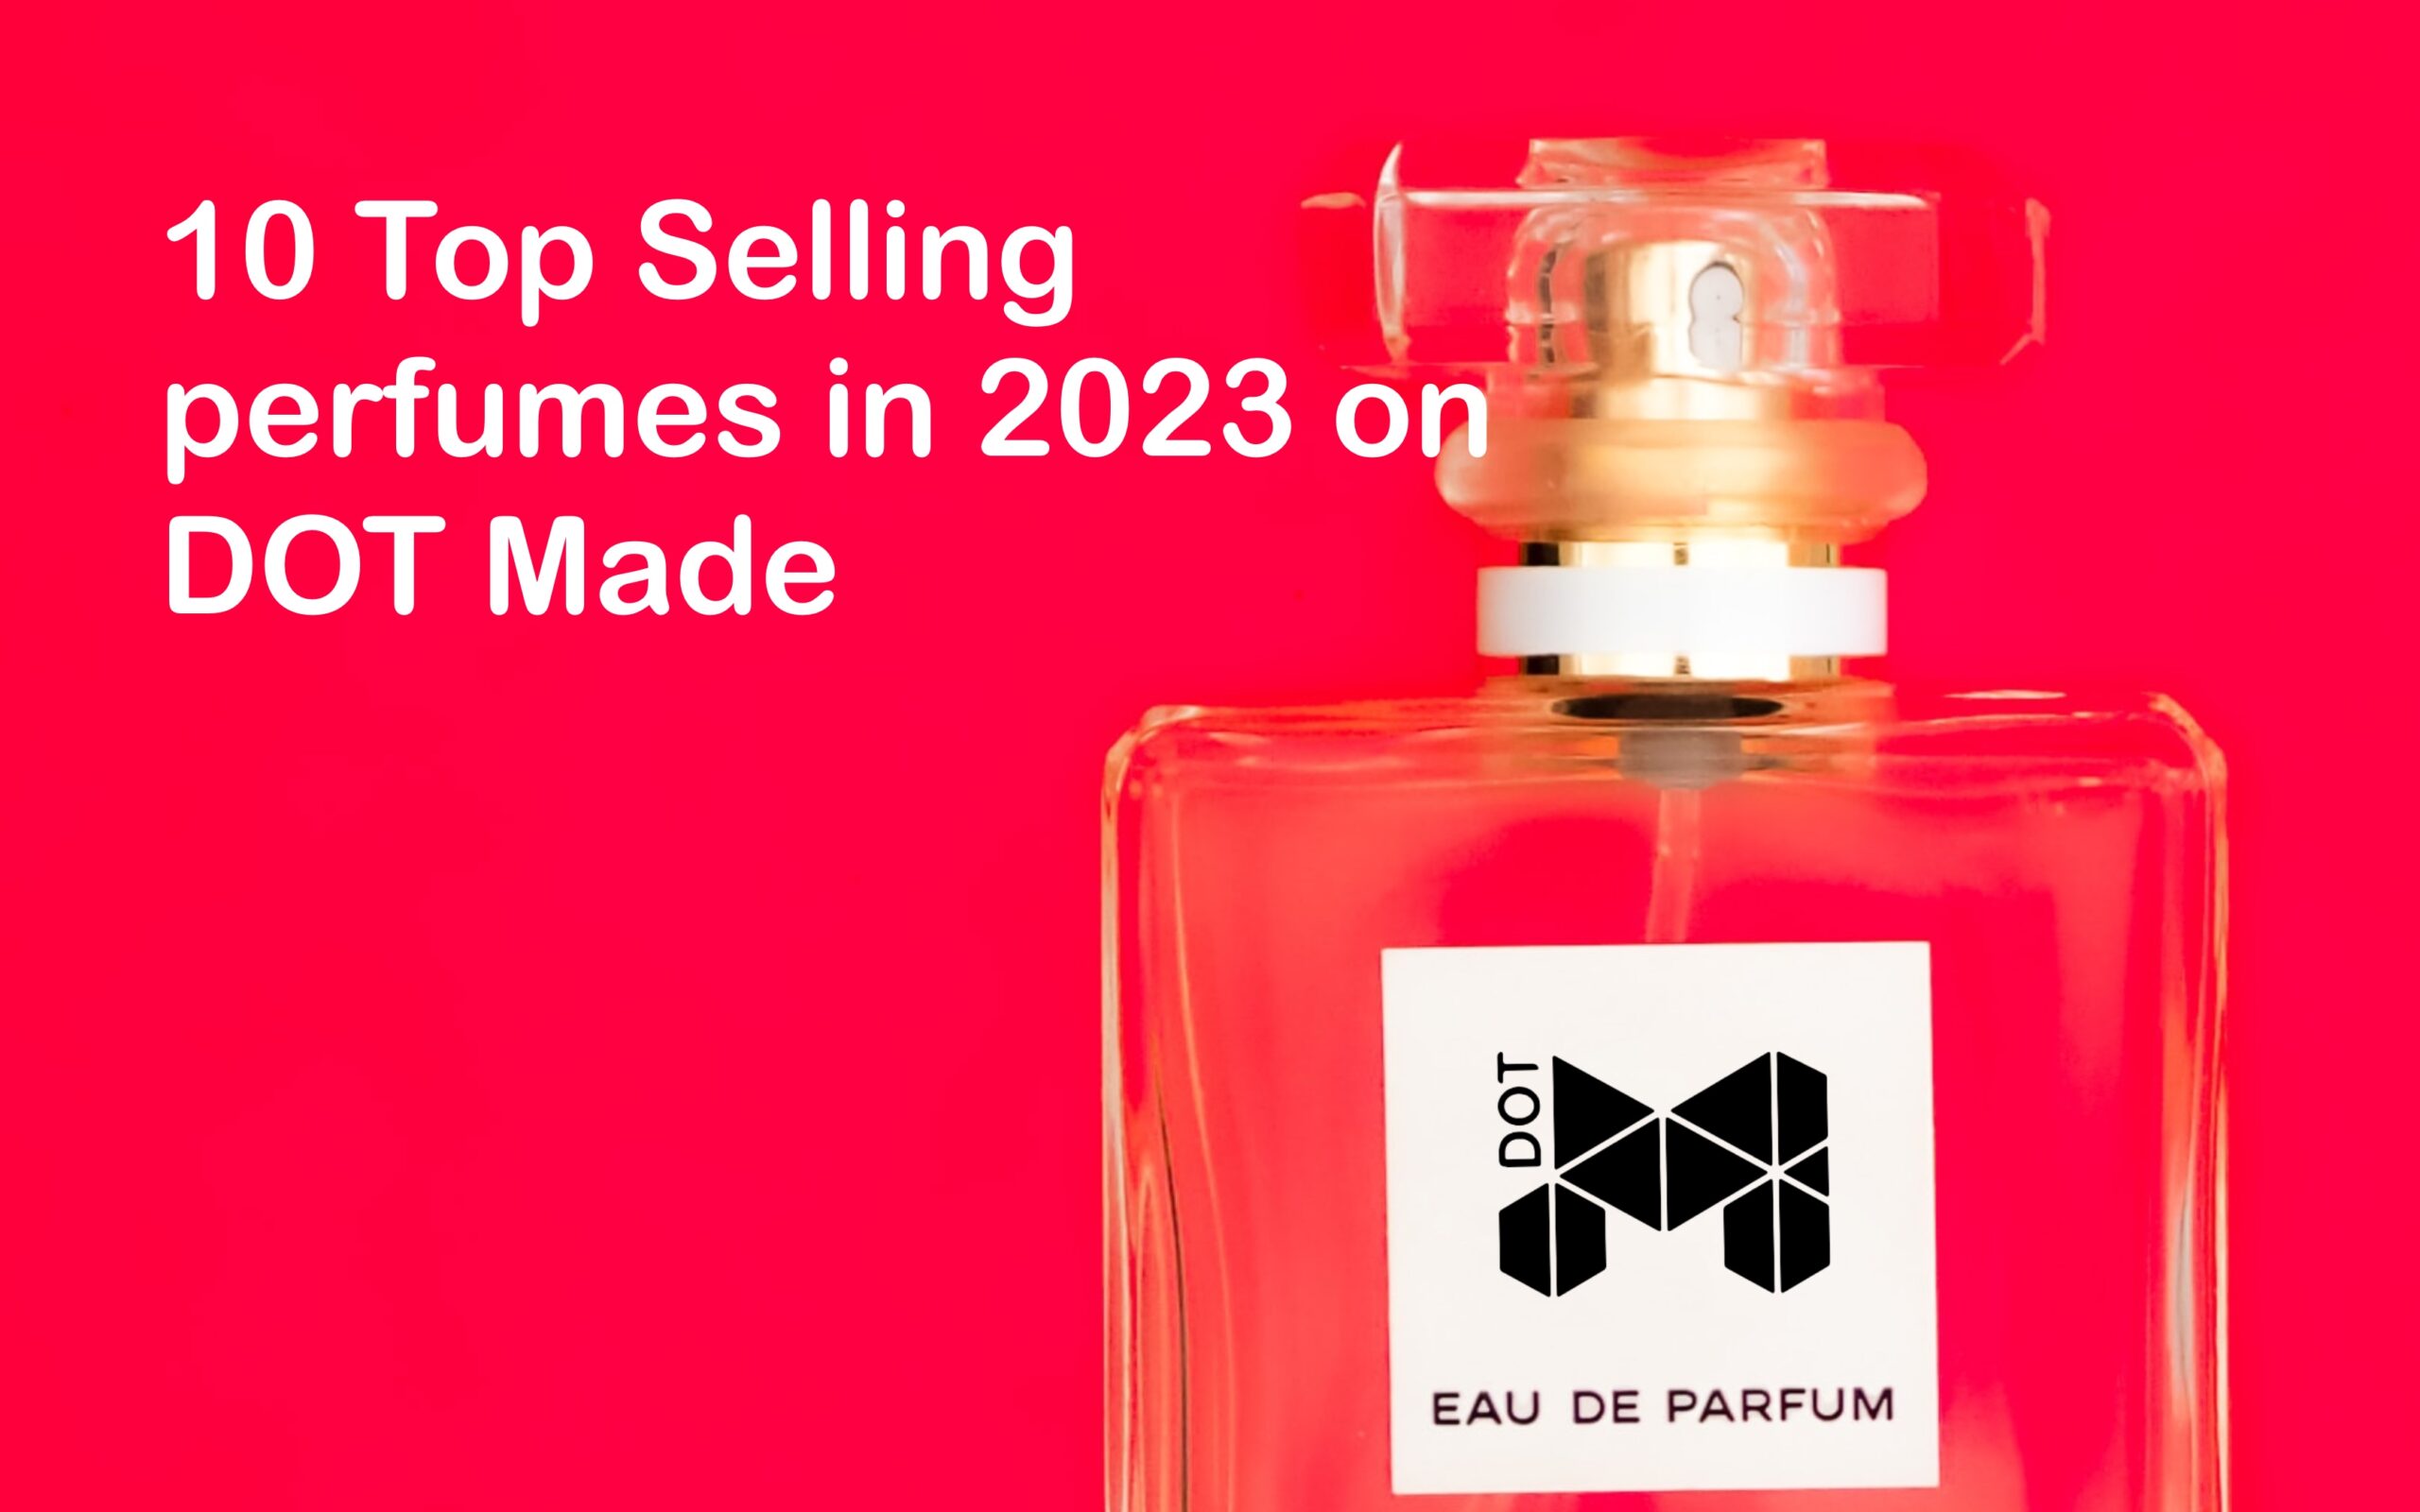 10 Top Selling perfumes in 2023 on DOT Made poster